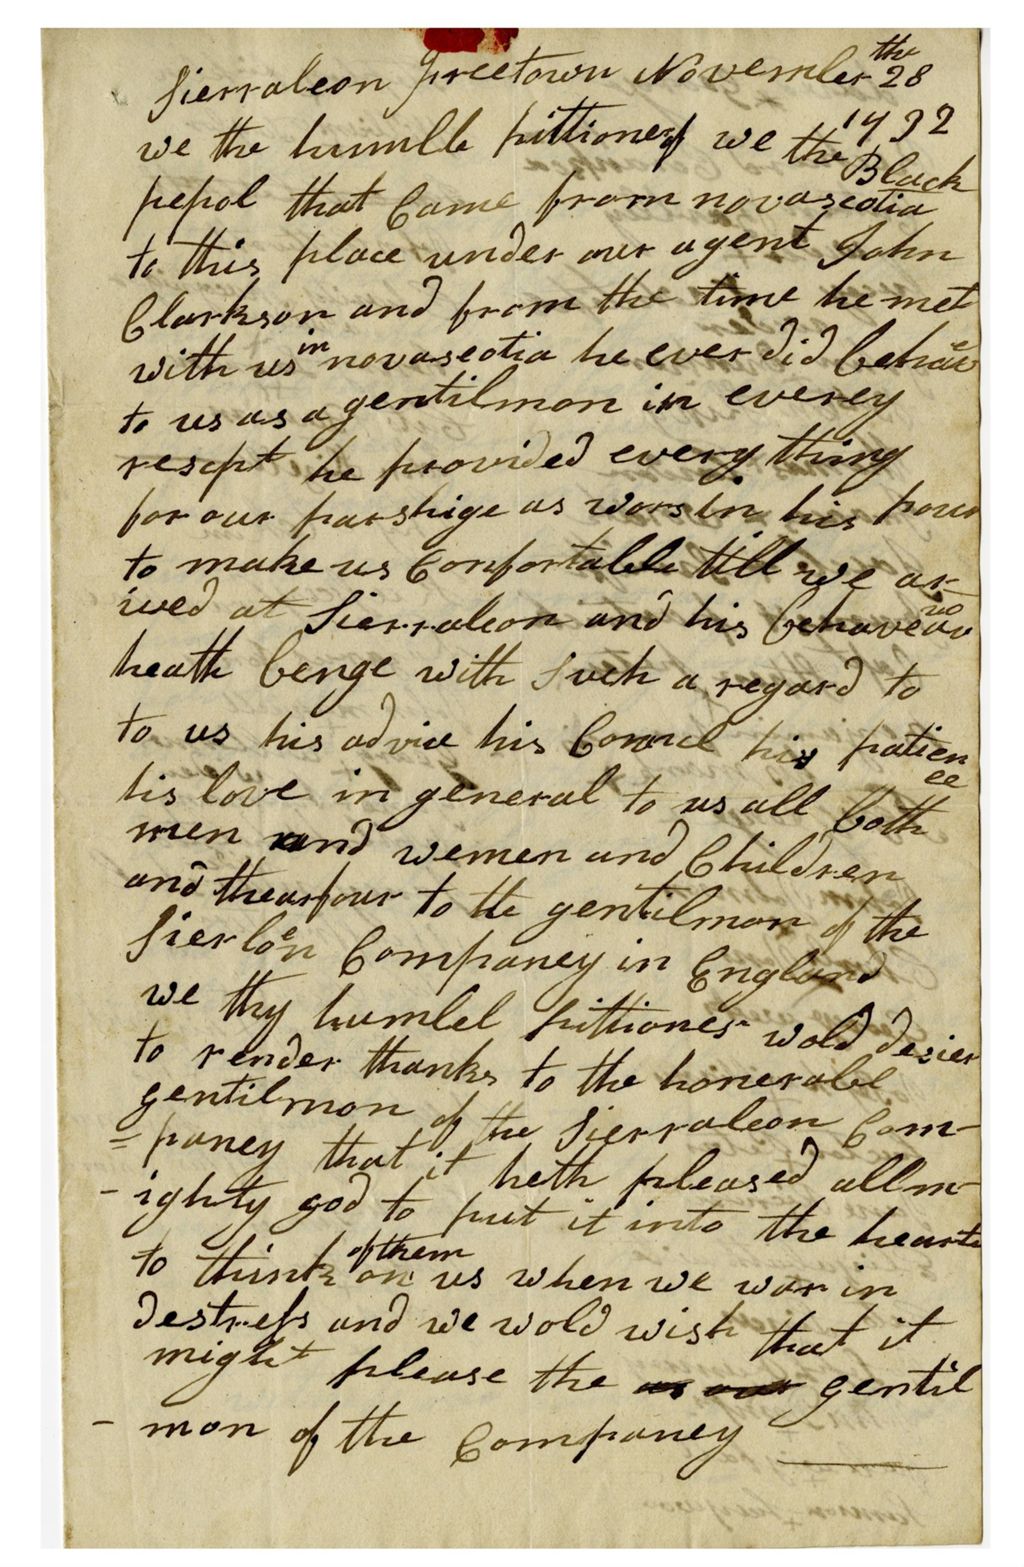 Miniature of Letter from black petitioners to John Clarkson